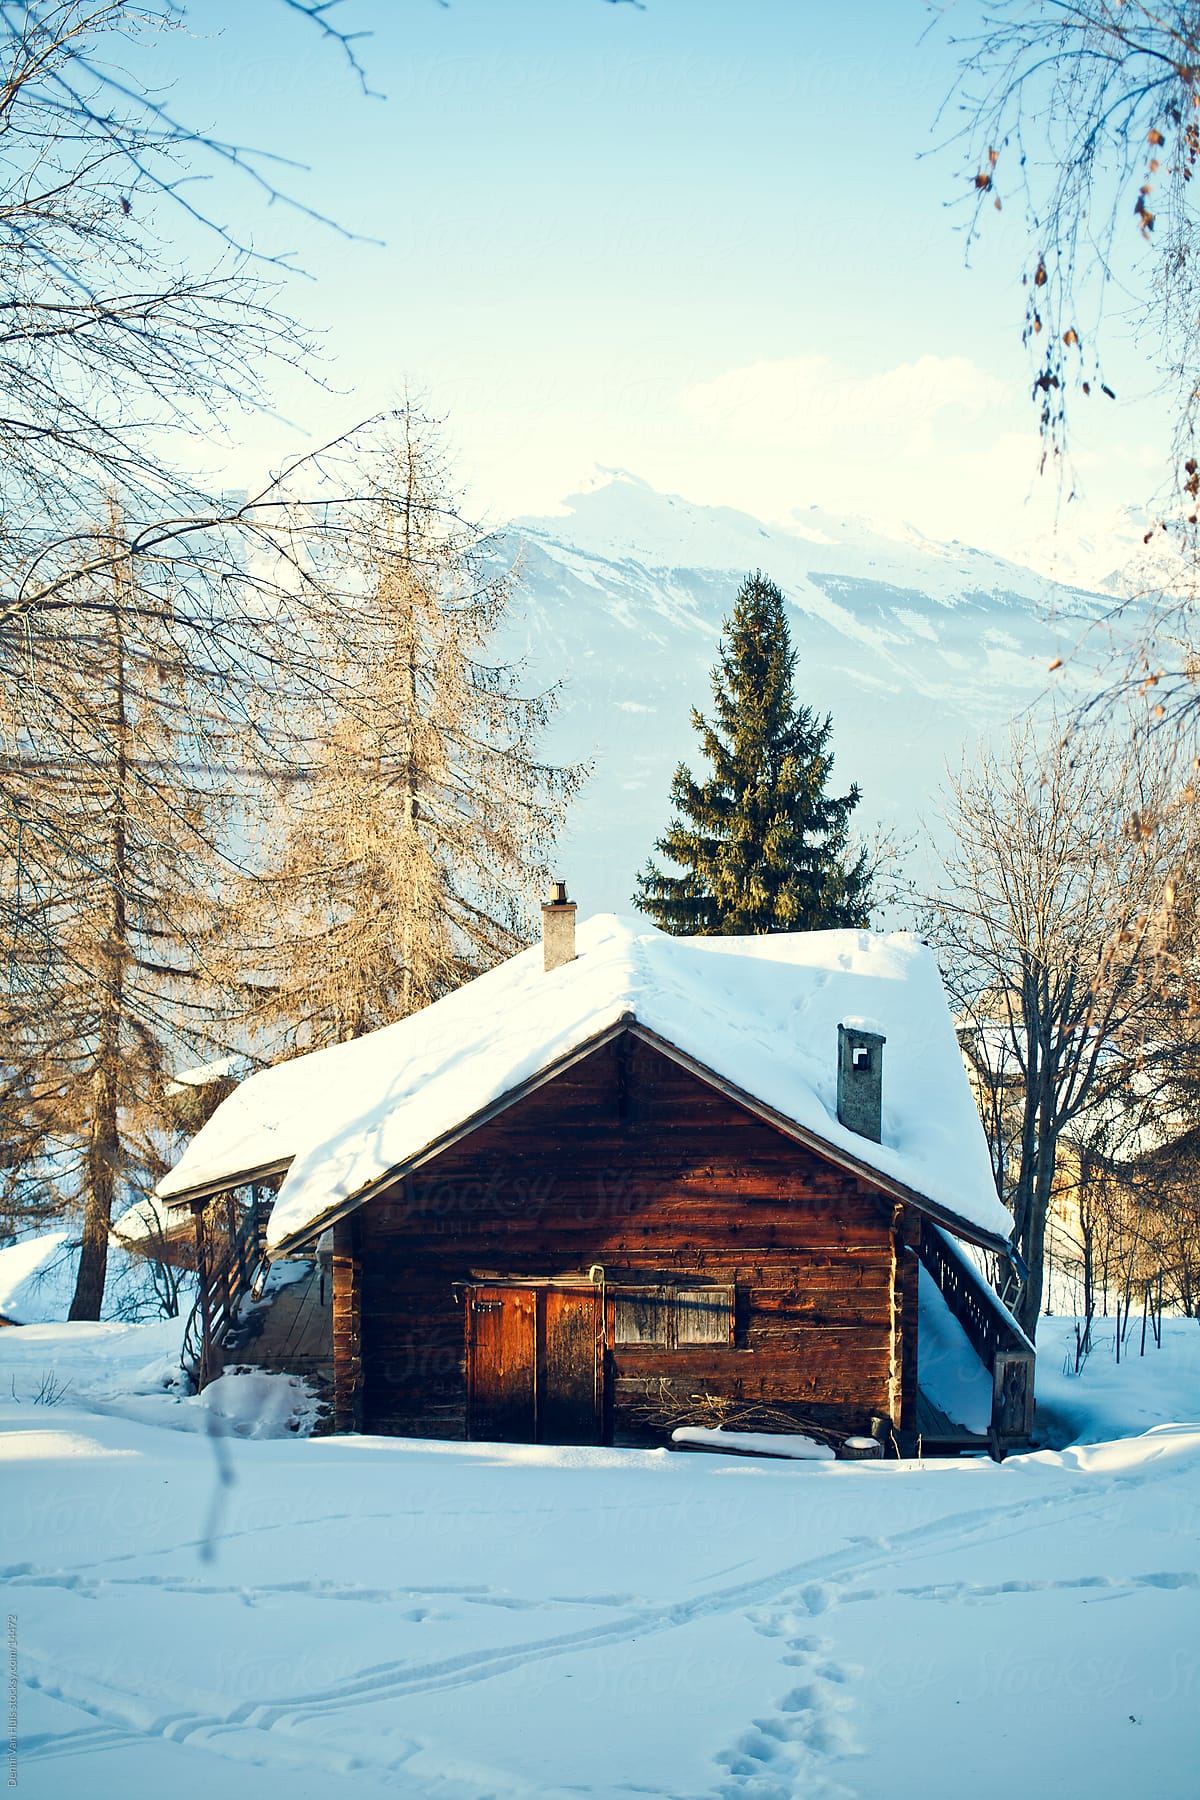 Wooden cabin in the snow in the mountains